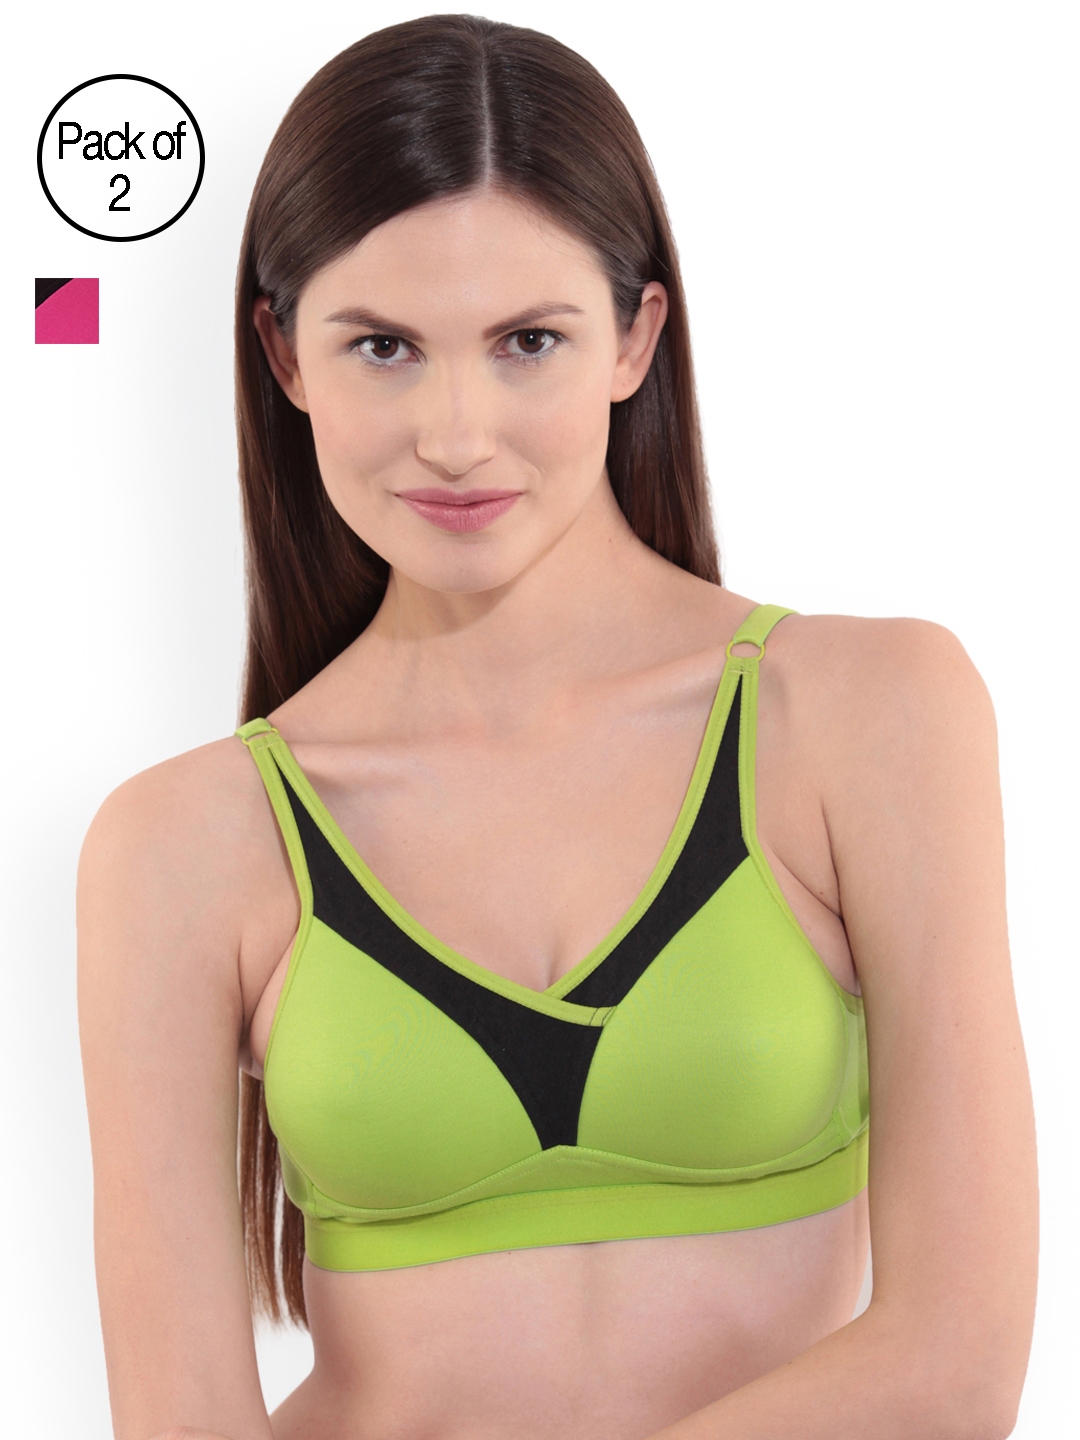 Buy online Pack Of 2 Tube Bra from lingerie for Women by Amour